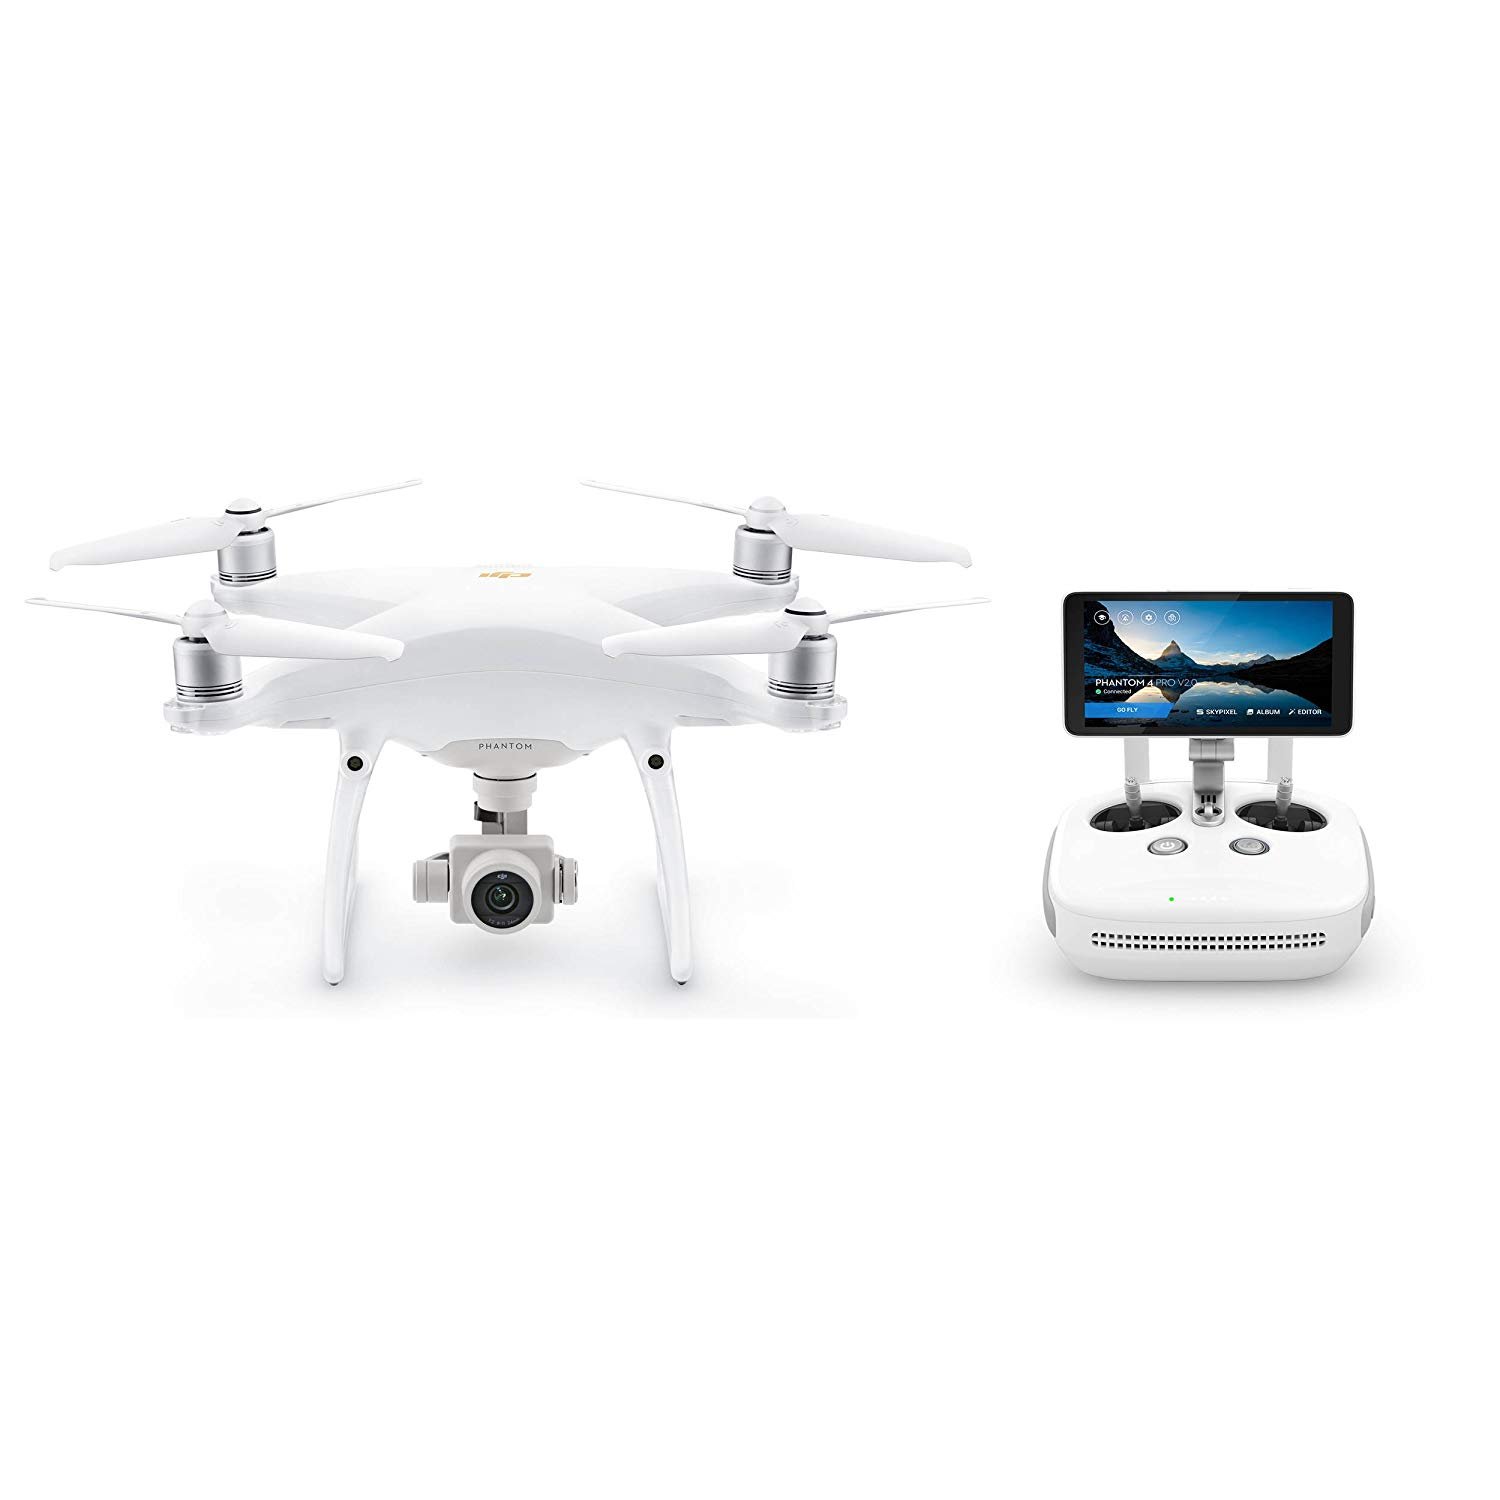 dji phantom 4 pro plus (pro+)quadcopter drone with 1-inch 20mp 4k camera kit with built in monitor + 3 total dji batteries + 2 64gb micro sd cards + reader + guards + range extender + charging hub - image 5 of 5